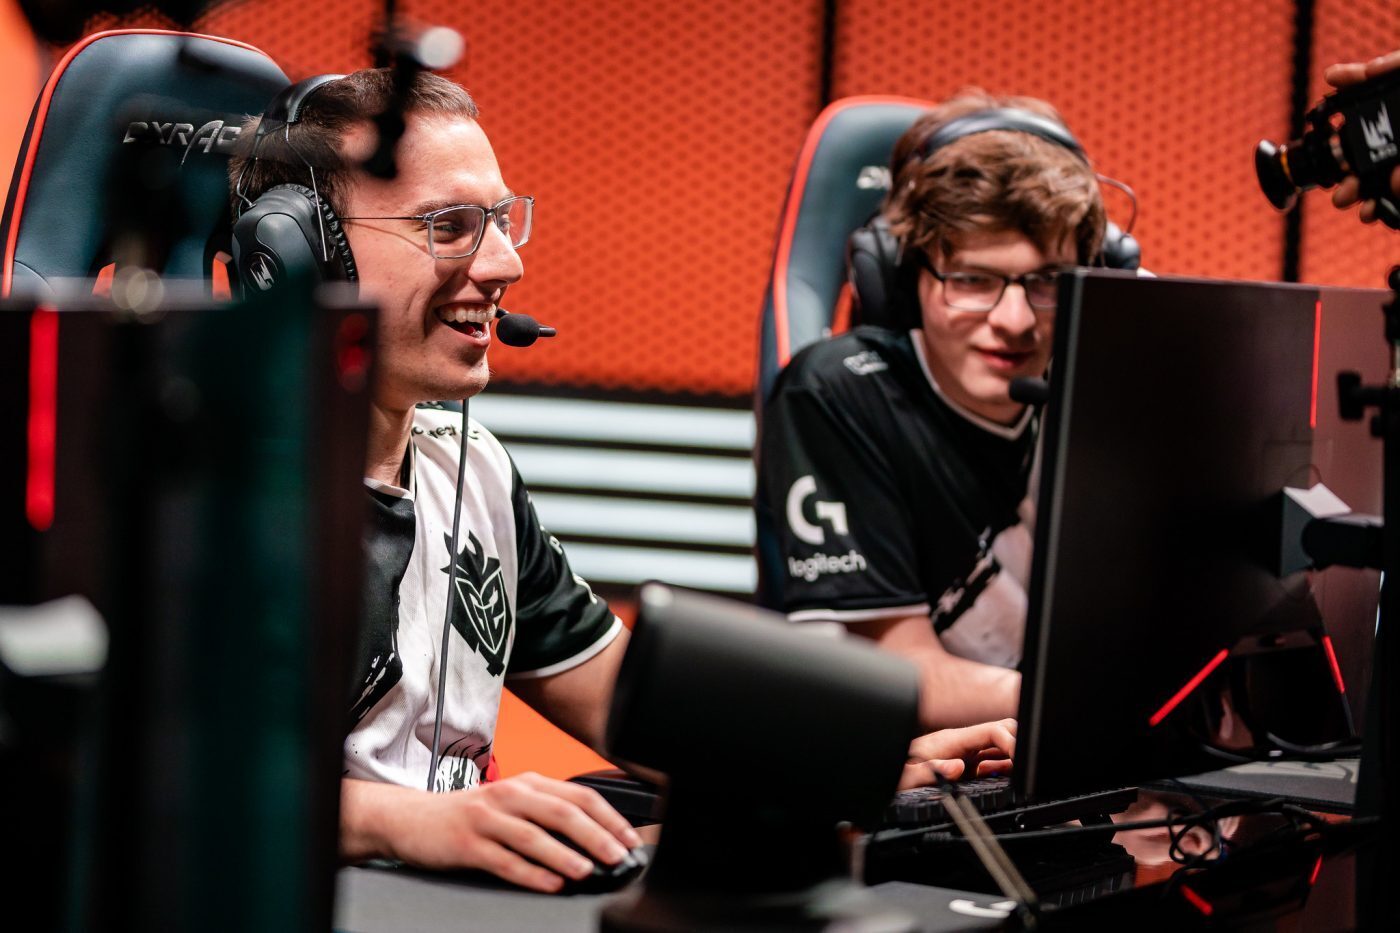 G2 Esports claimed revenge against Fnatic in the rivalry rematch. Image via Riot Games.